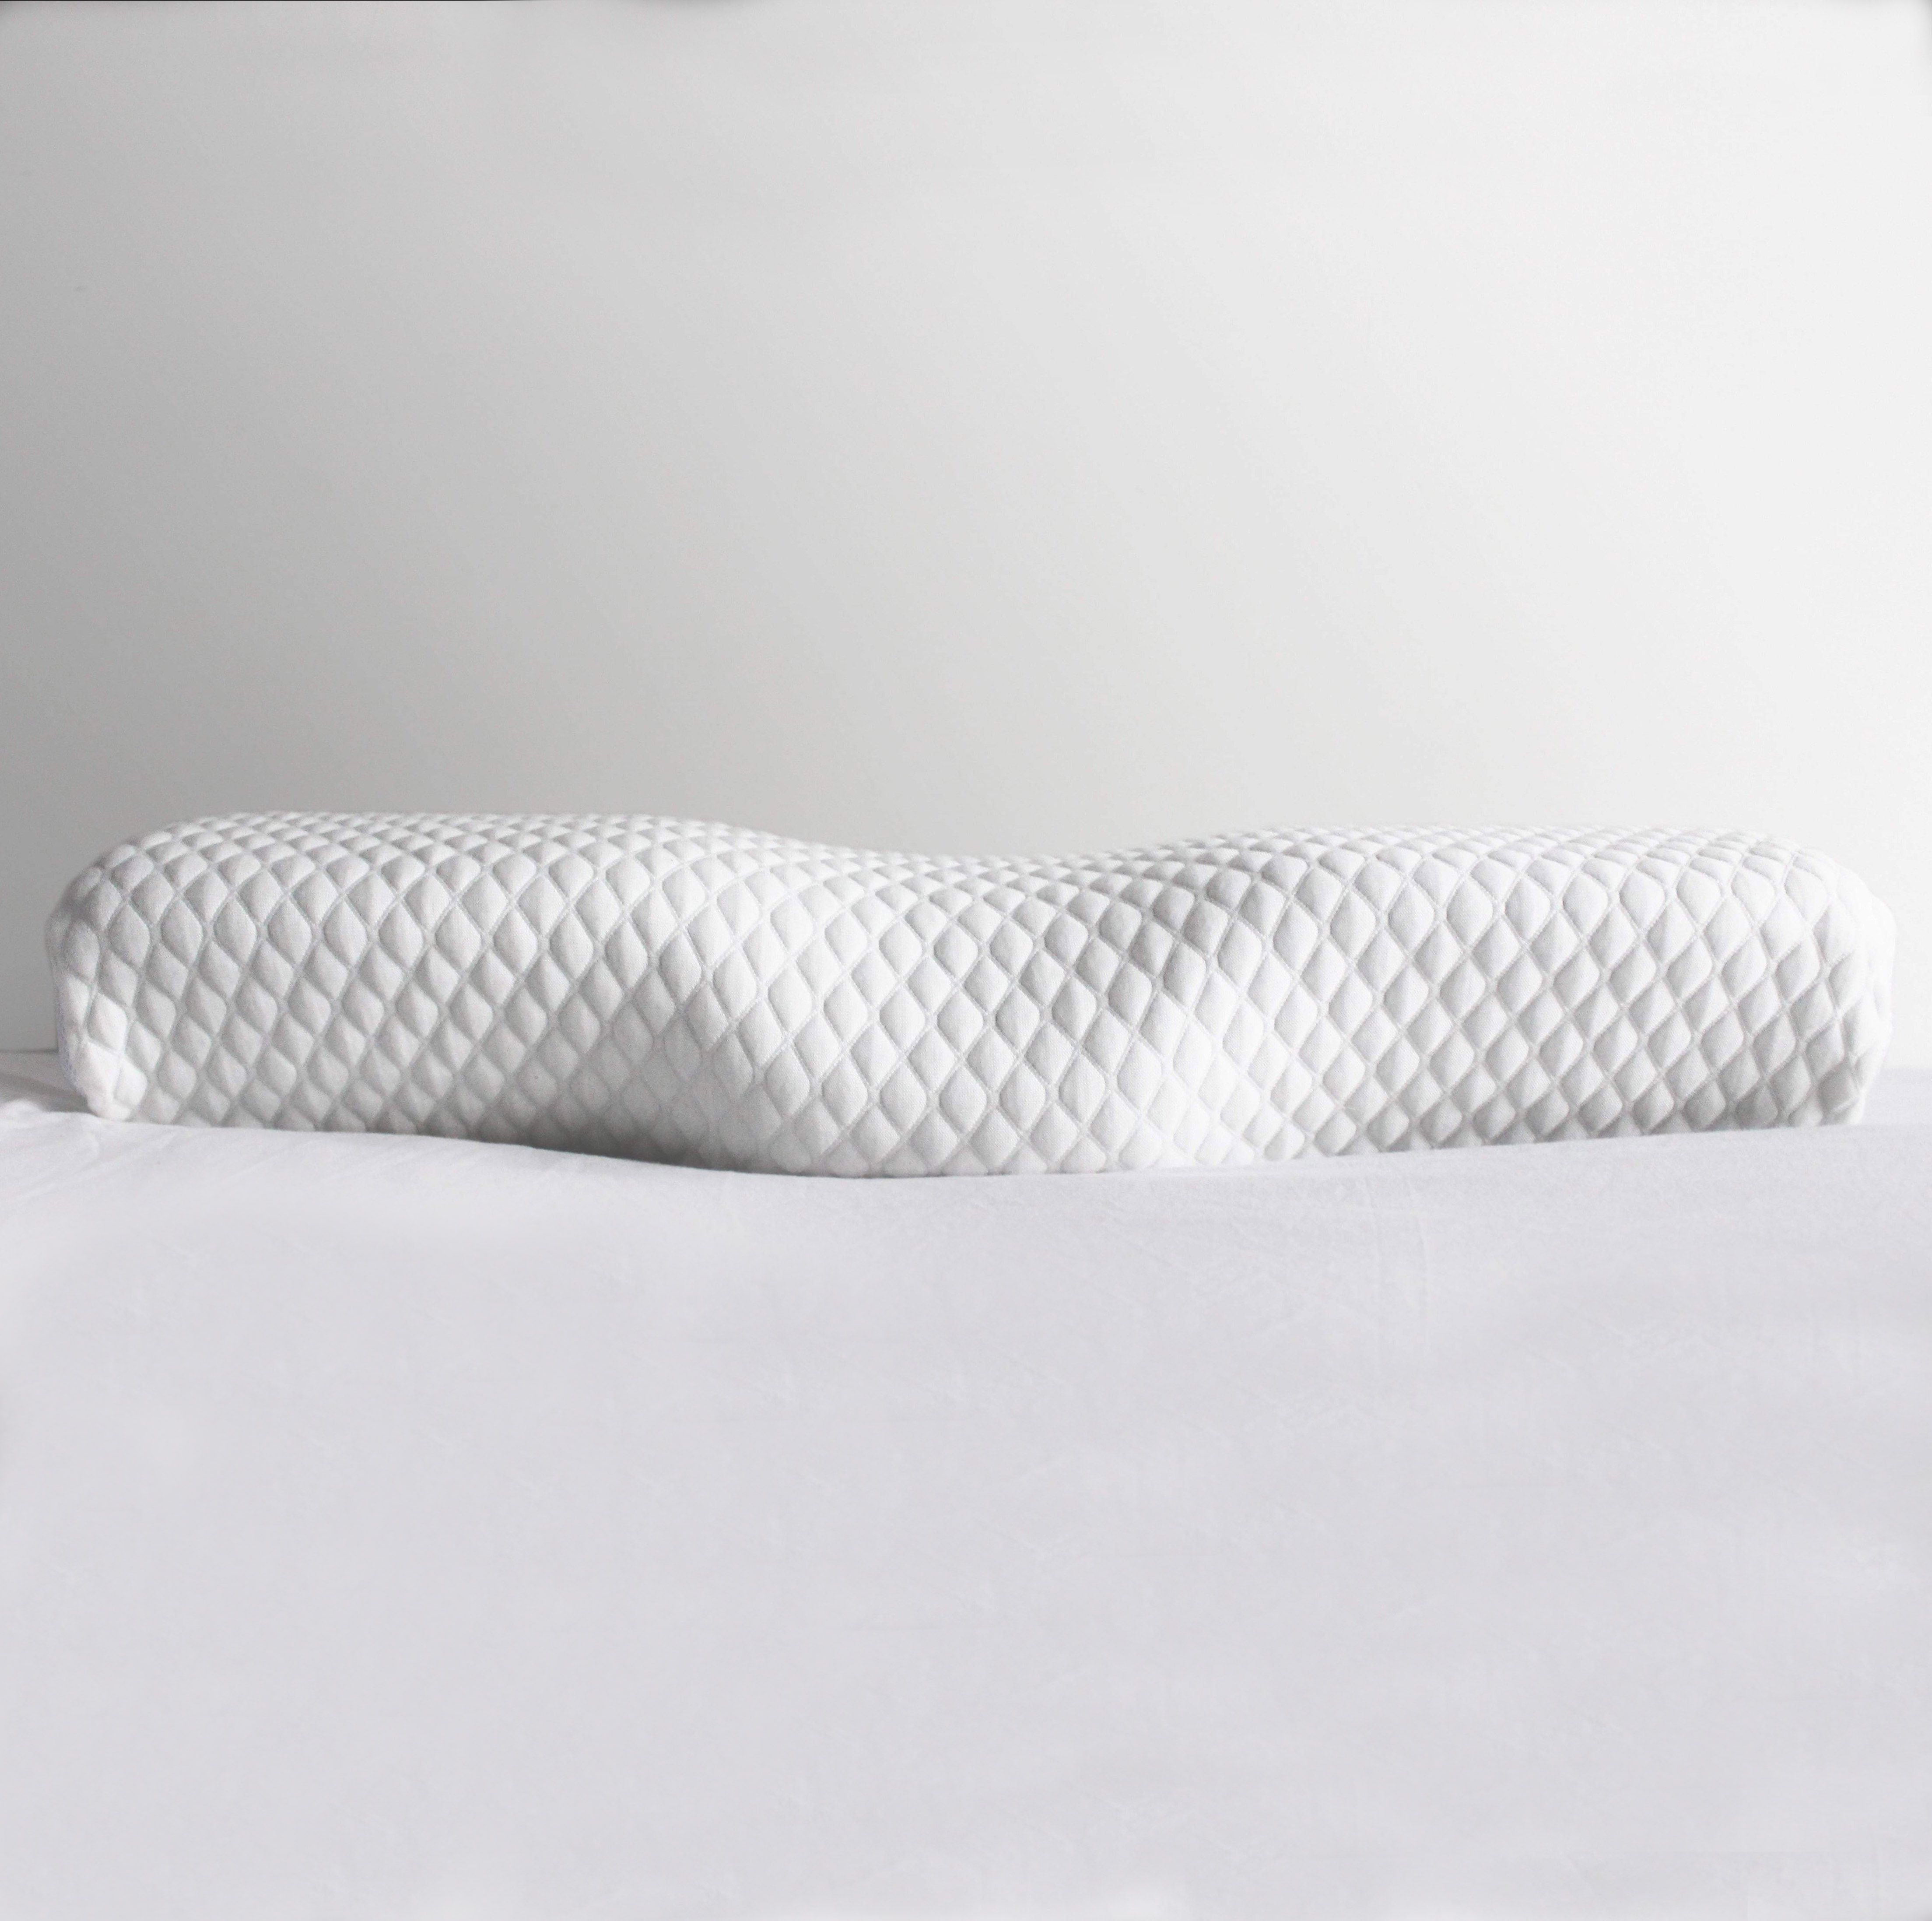 Buy Set of 2 Sleep In Comfort Square Pillows from Next USA